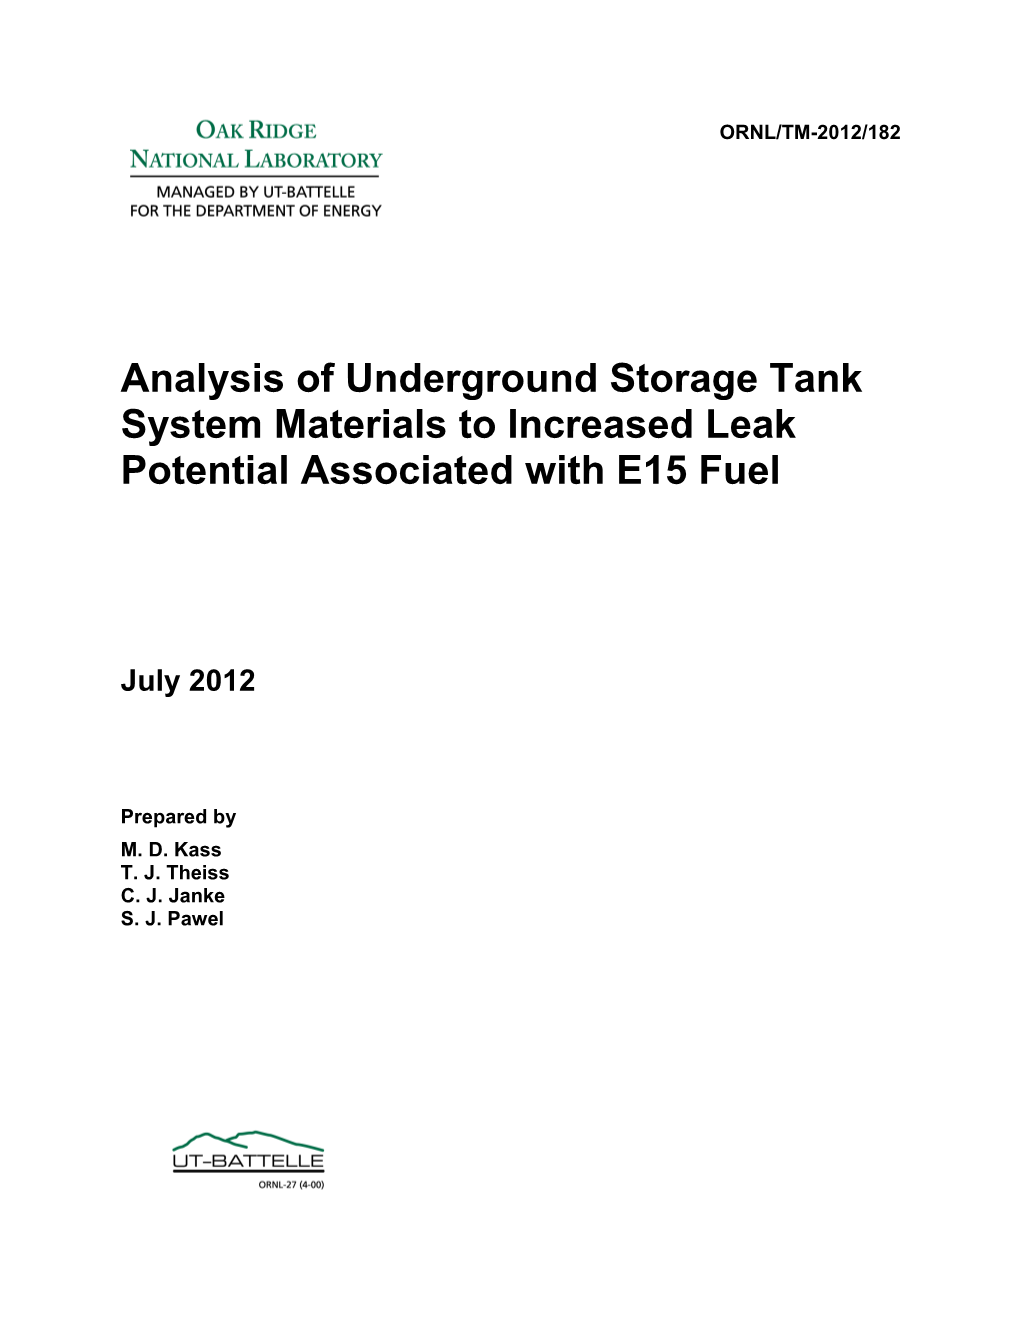 Analysis of Underground Storage Tank System Materials to Increased Leak Potential Associated with E15 Fuel